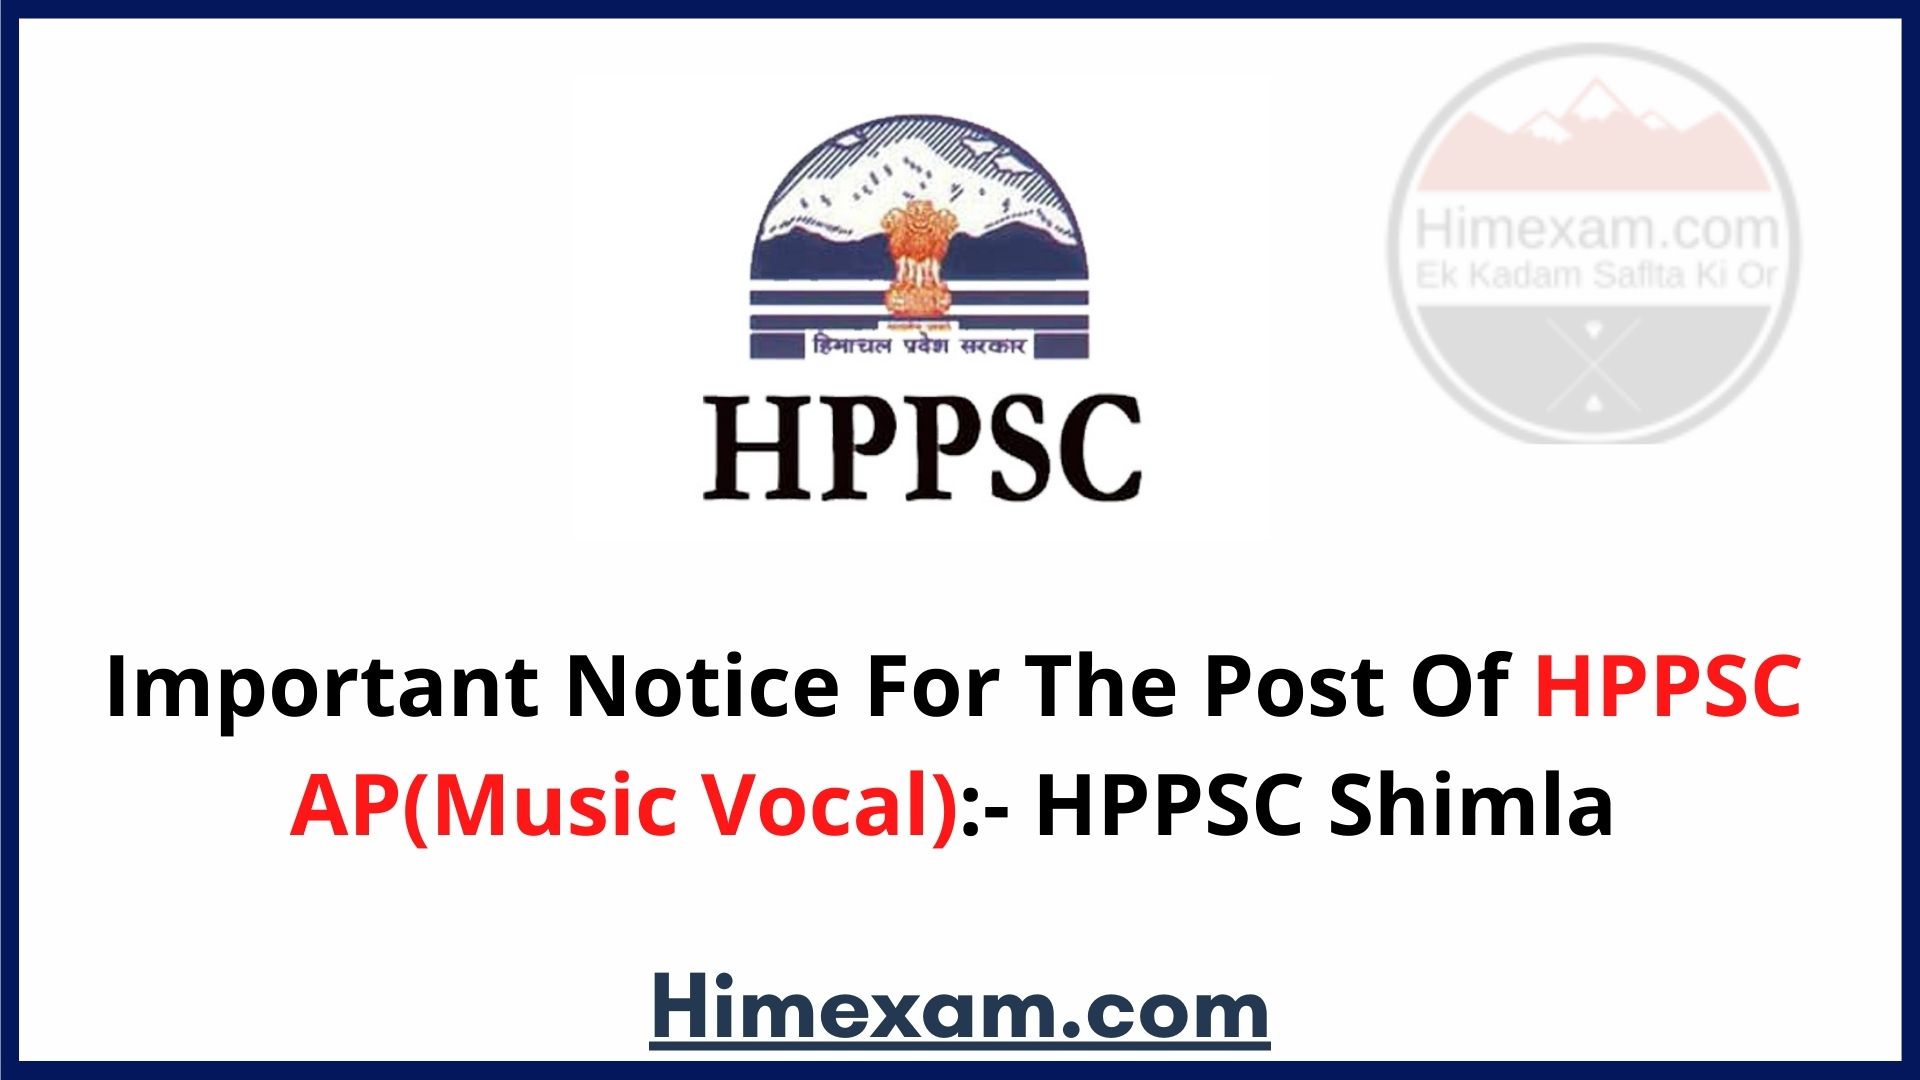 Important Notice For The Post Of HPPSC AP(Music Vocal):- HPPSC Shimla